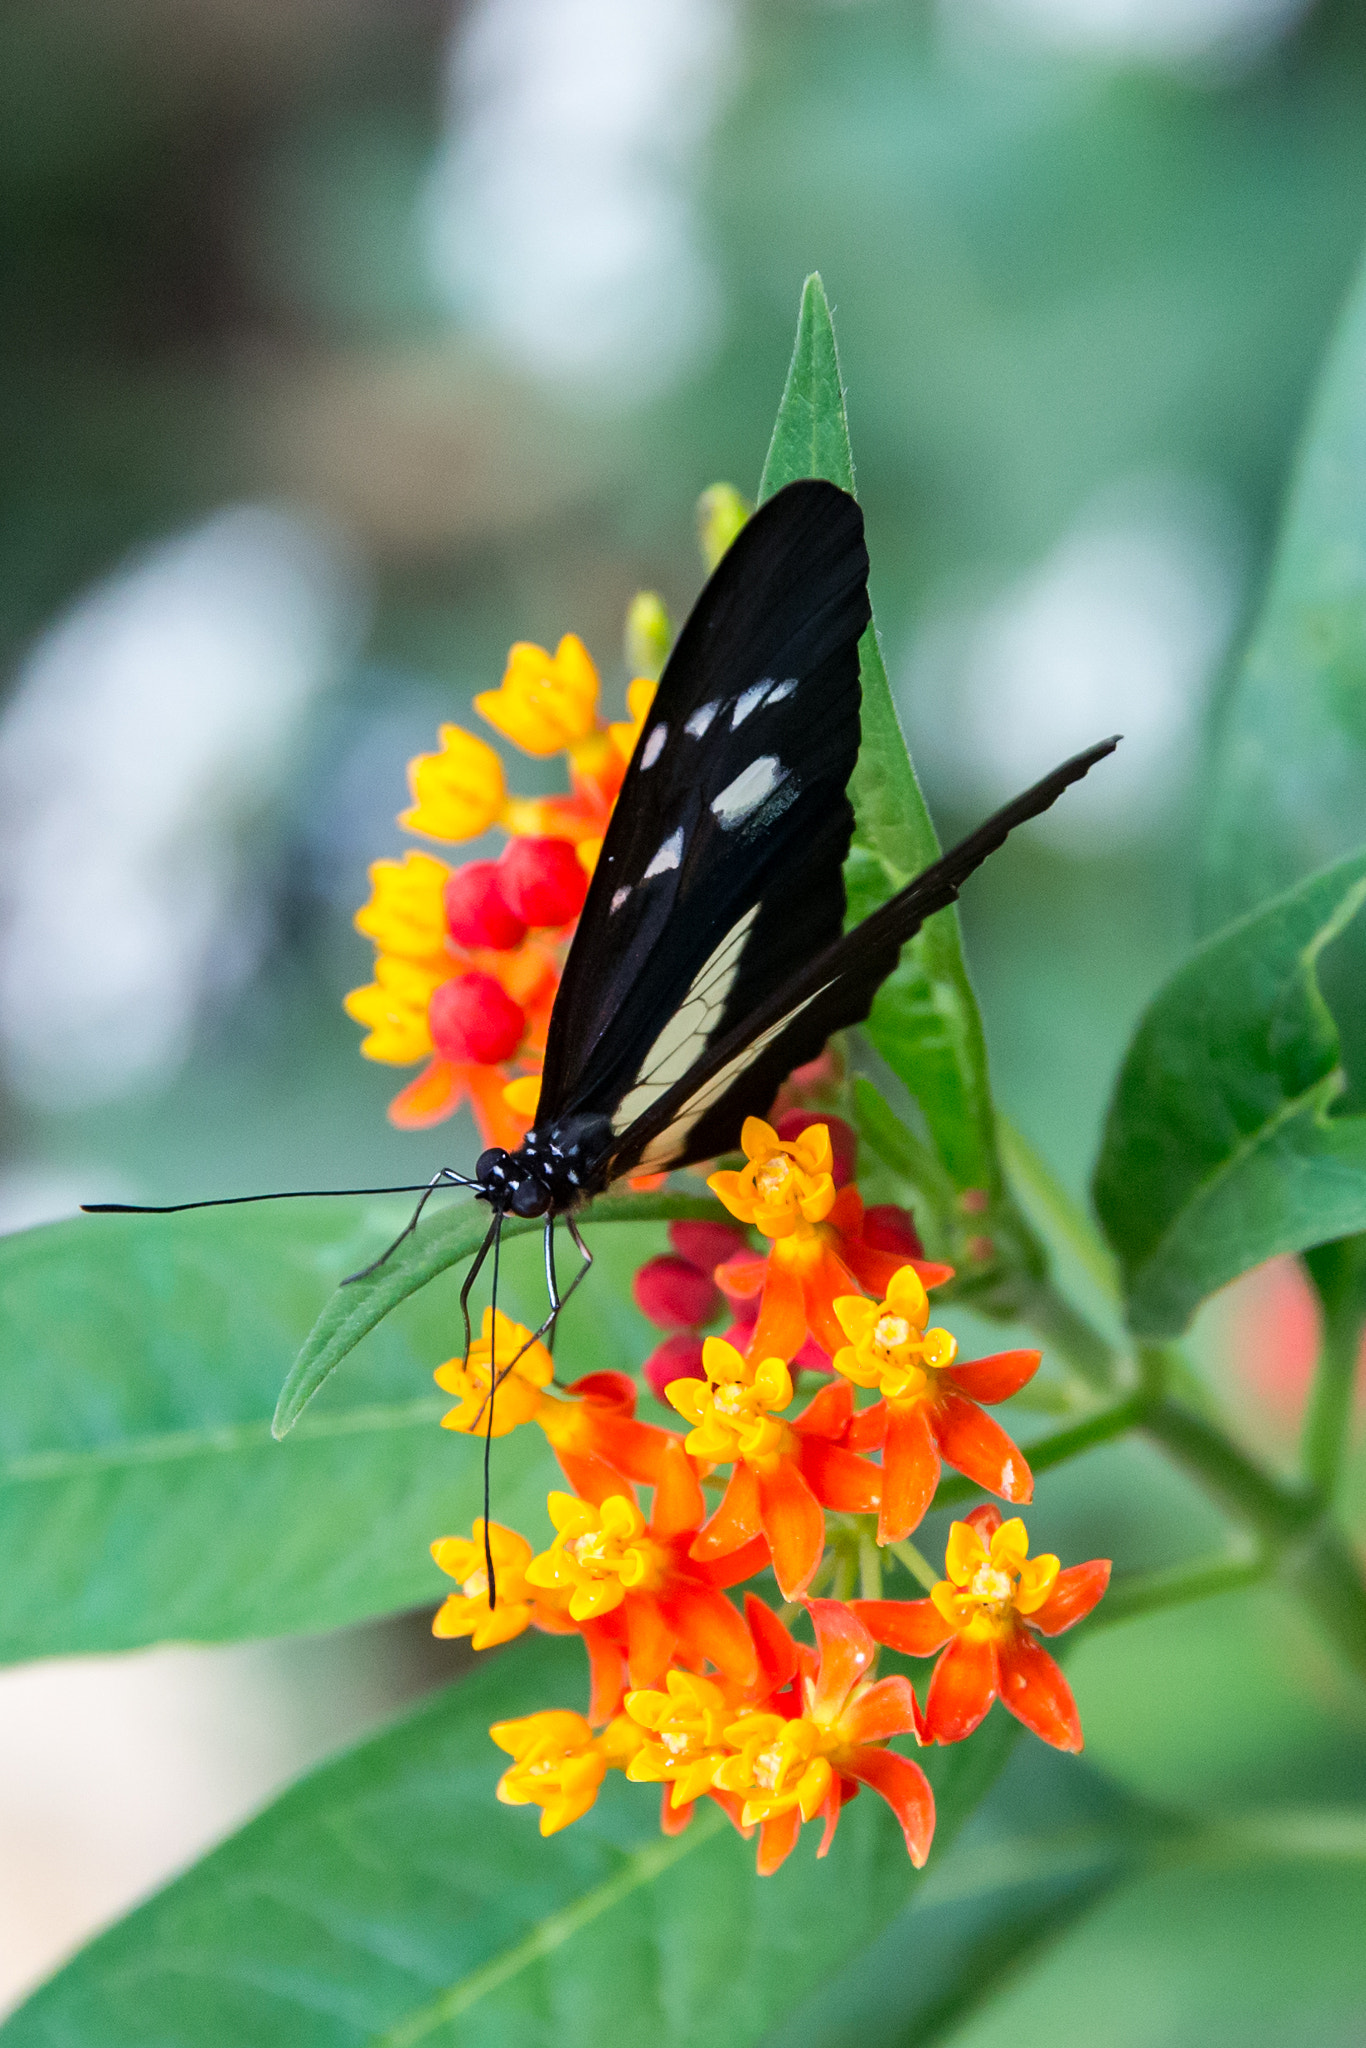 Canon EOS-1D X + Sigma 24-105mm f/4 DG OS HSM | A sample photo. Black butterfly photography